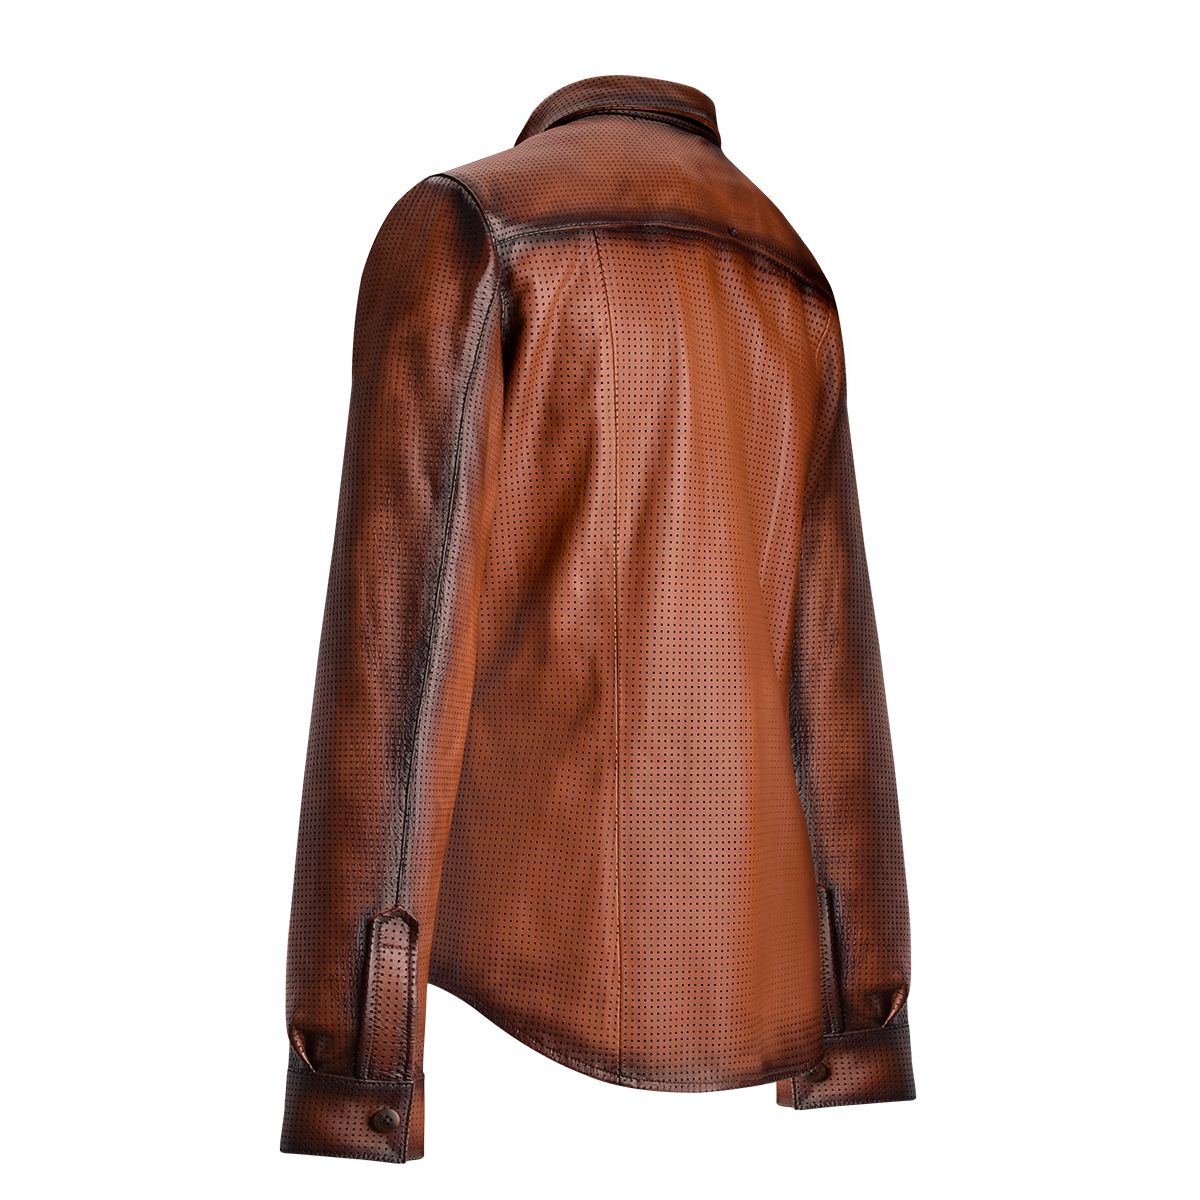 Creed Wear Men's Decatur Leather Jacket - Brown / 3XL